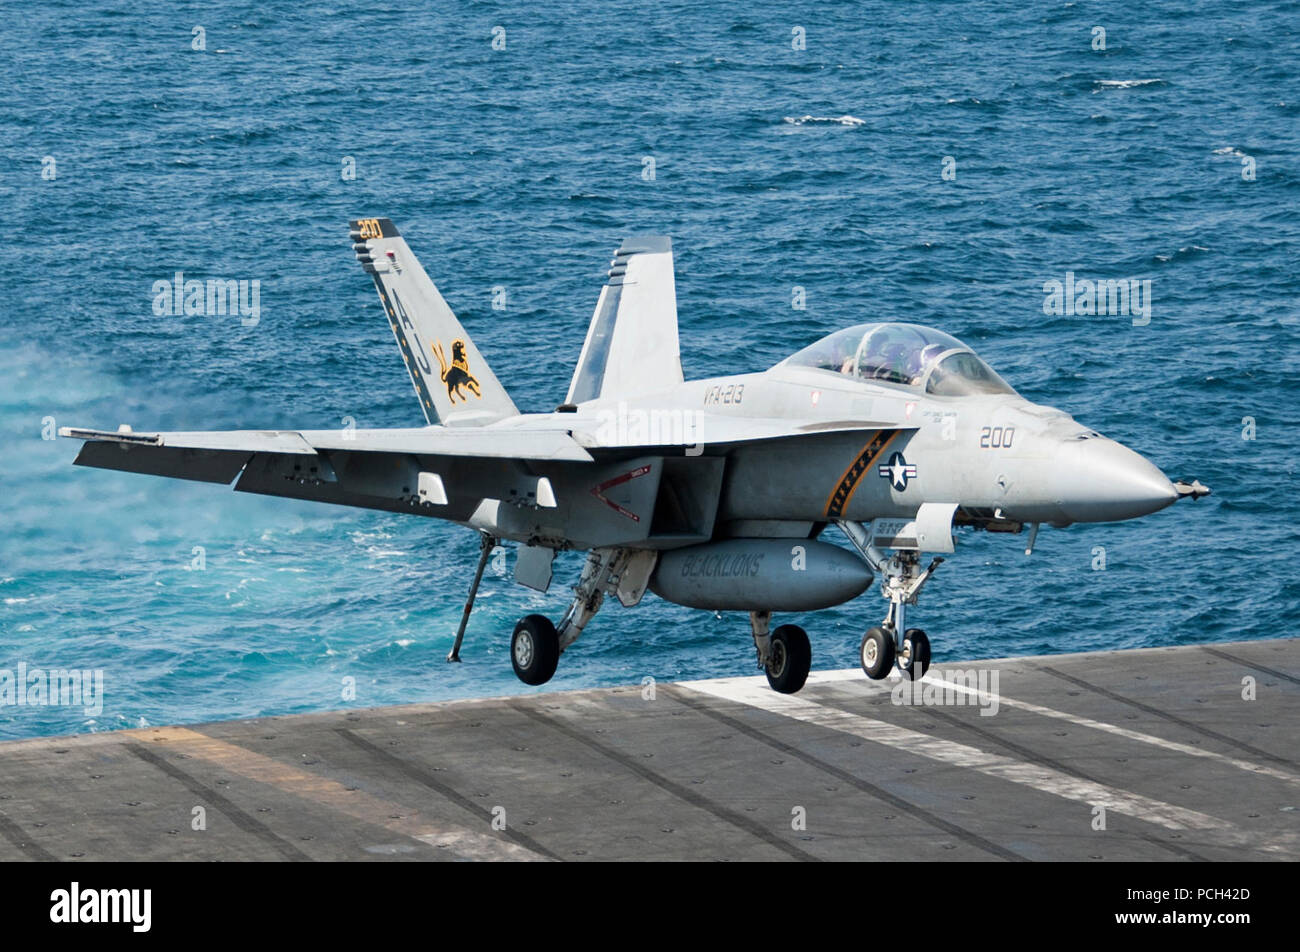 A U.S. Navy F/A-18F Super Hornet aircraft assigned to Strike Fighter Squadron (VFA) 213 lands aboard the aircraft carrier USS George H.W. Bush (CVN 77) in the Persian Gulf Sept. 23, 2014. The George H.W. Bush supported maritime security operations and theater security cooperation efforts in the U.S. 5th Fleet area of responsibility. Stock Photo